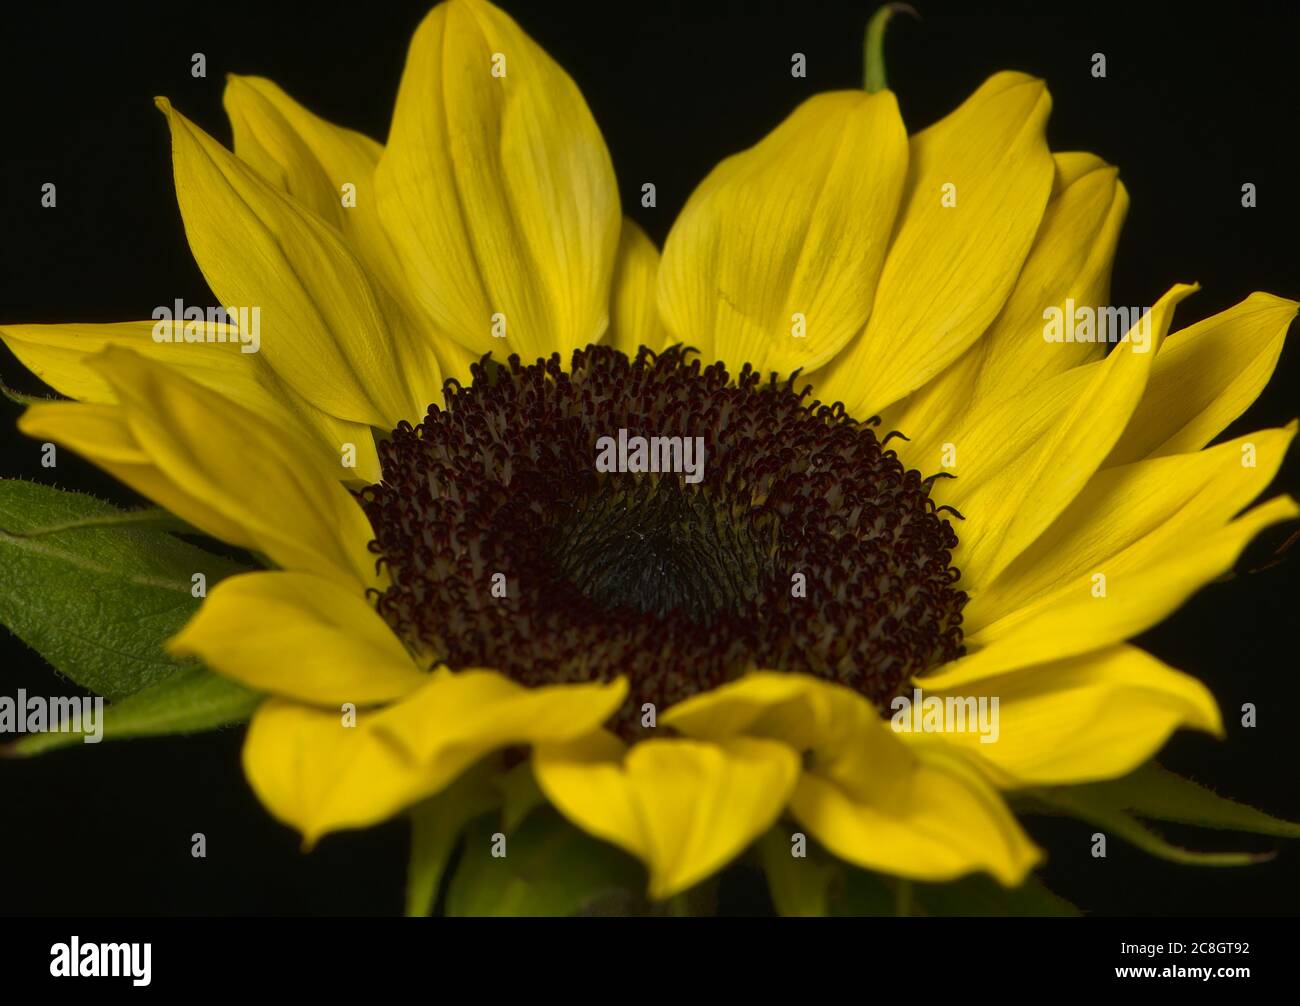 Vibrant yellow sunflower on a black background Stock Photo